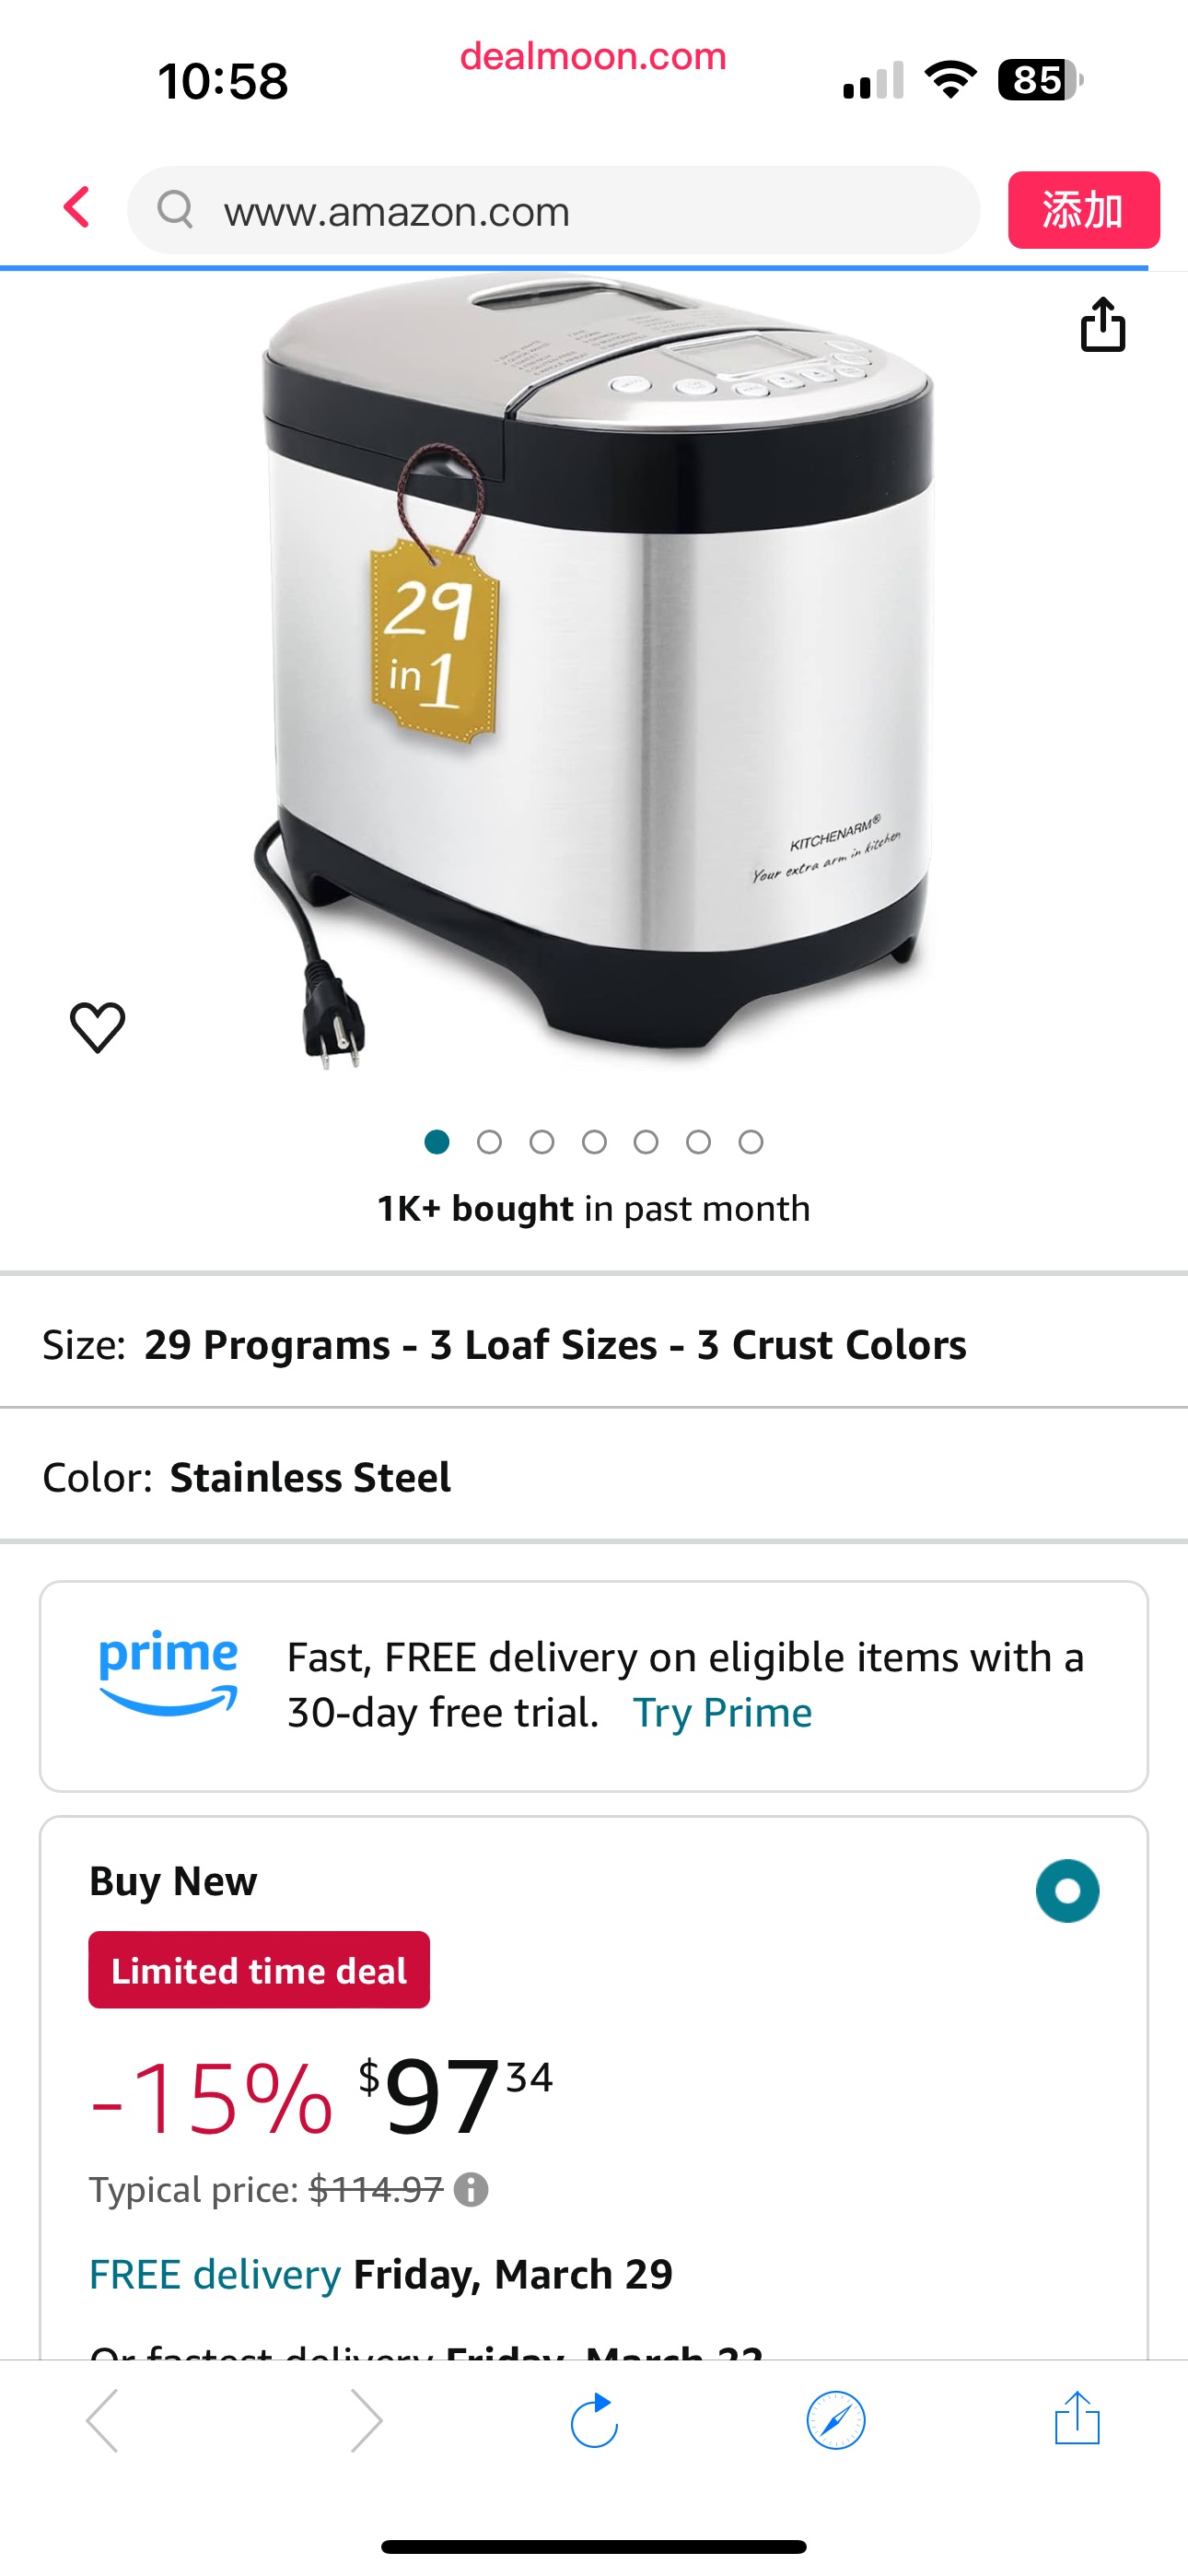 Amazon.com: KITCHENARM 29-in-1 SMART Bread Machine with Gluten Free Setting 2LB 1.5LB 1LB Bread Maker Machine with Homemade Cycle - Stainless Steel Breadmaker with Recipes Whole Wheat Bread Making Mac